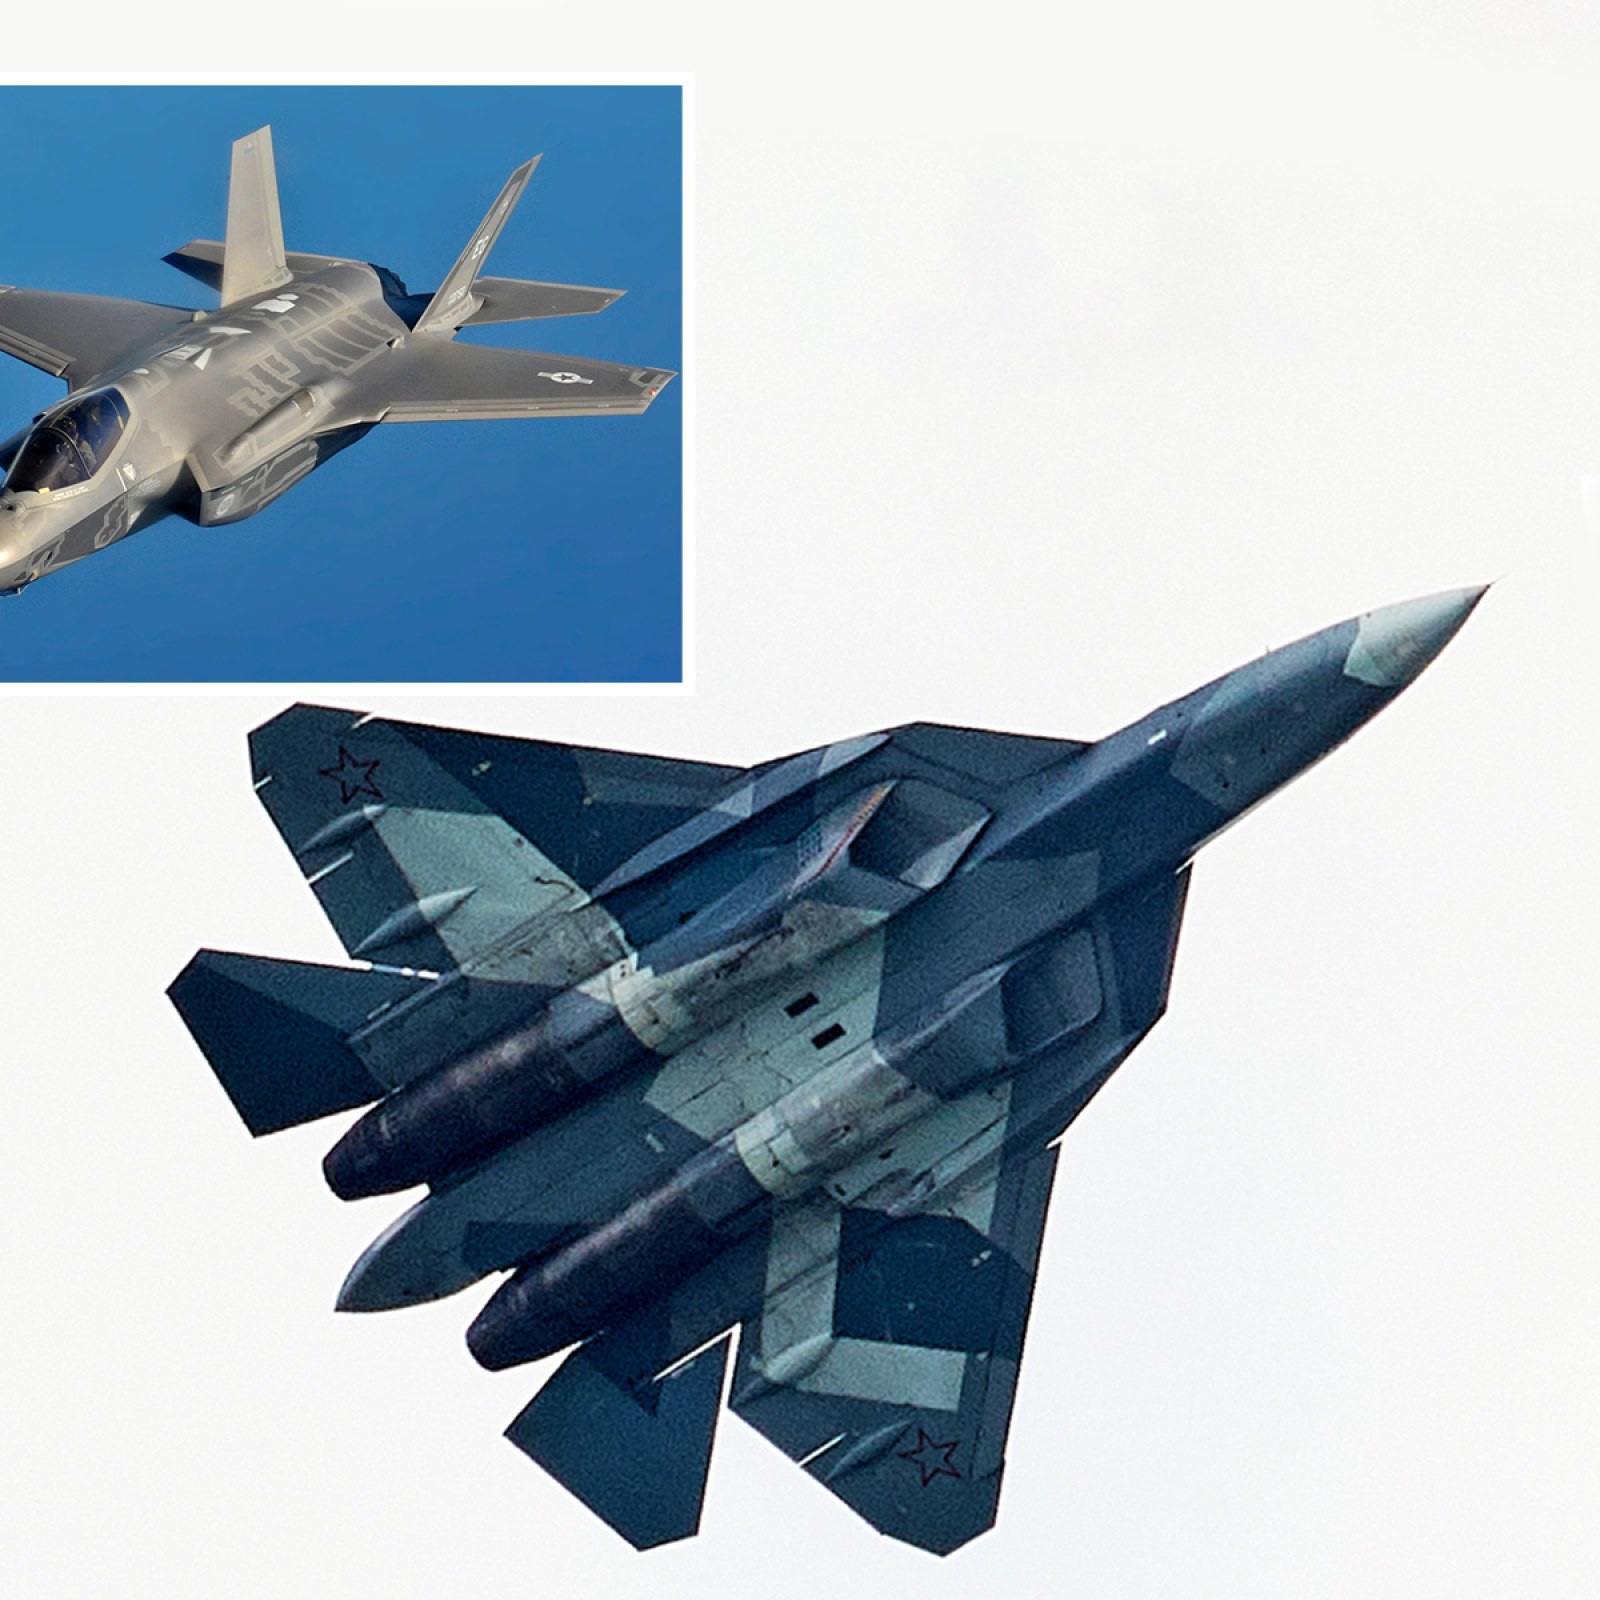 What does it actually mean when we say 'fifth-generation' fighter